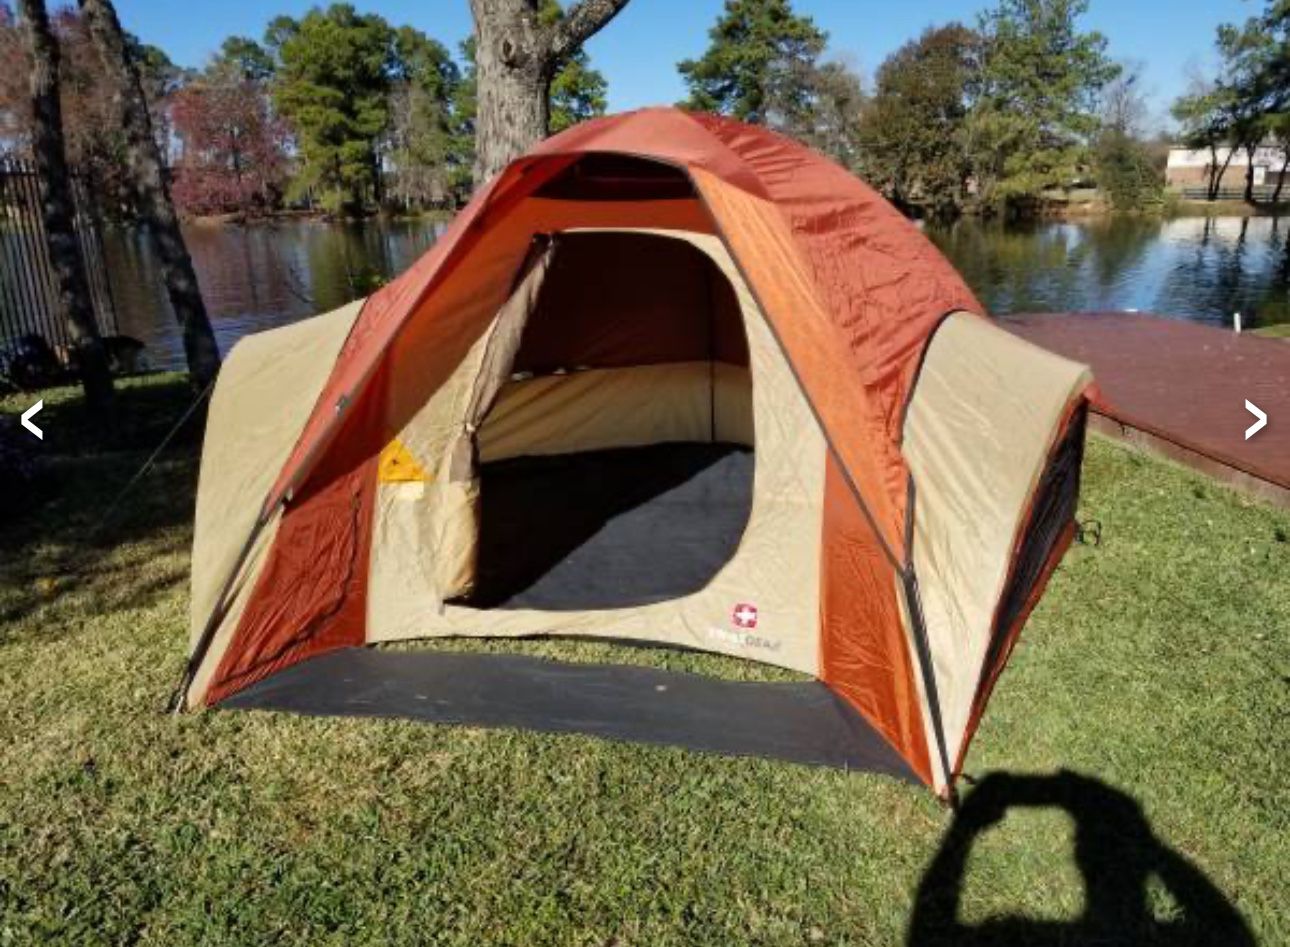 Like New Swiss Gear Camping Tent - 10' x 9'6" Model SG33062F w/ carrying bag  ONLY USED ONCE! Complete And Flawless! 